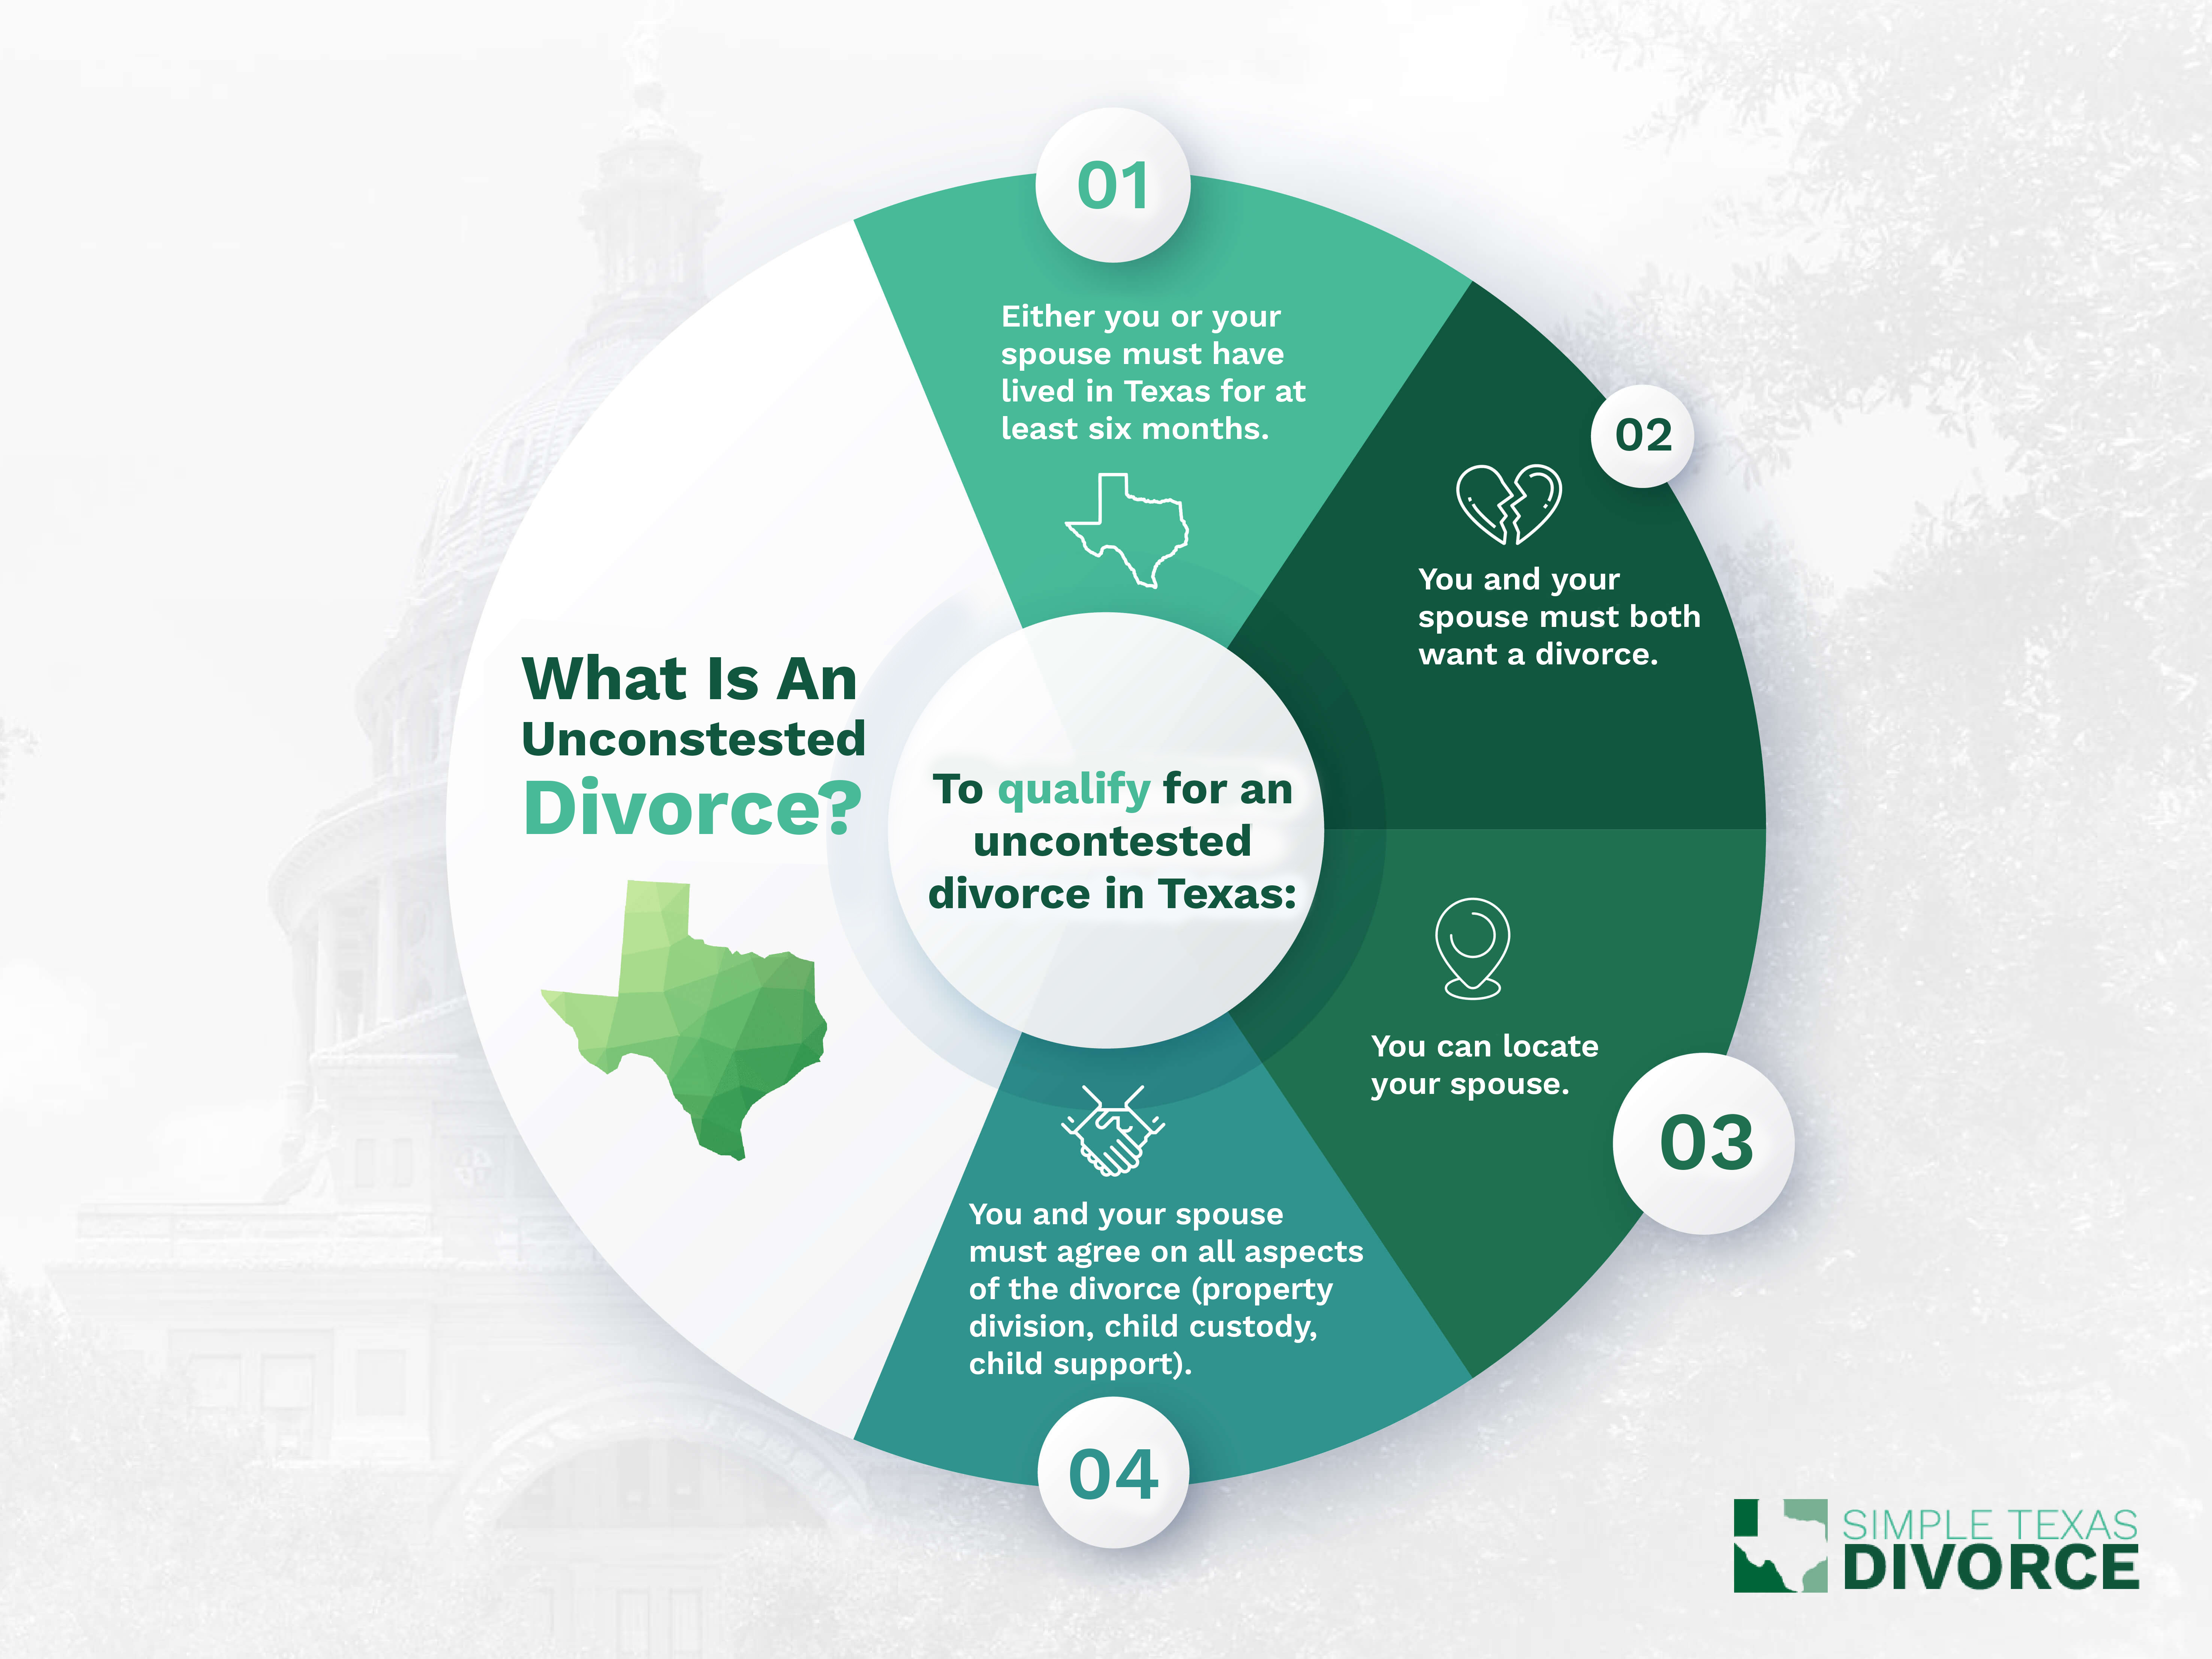 Qualifying for an uncontested divorce in Texas